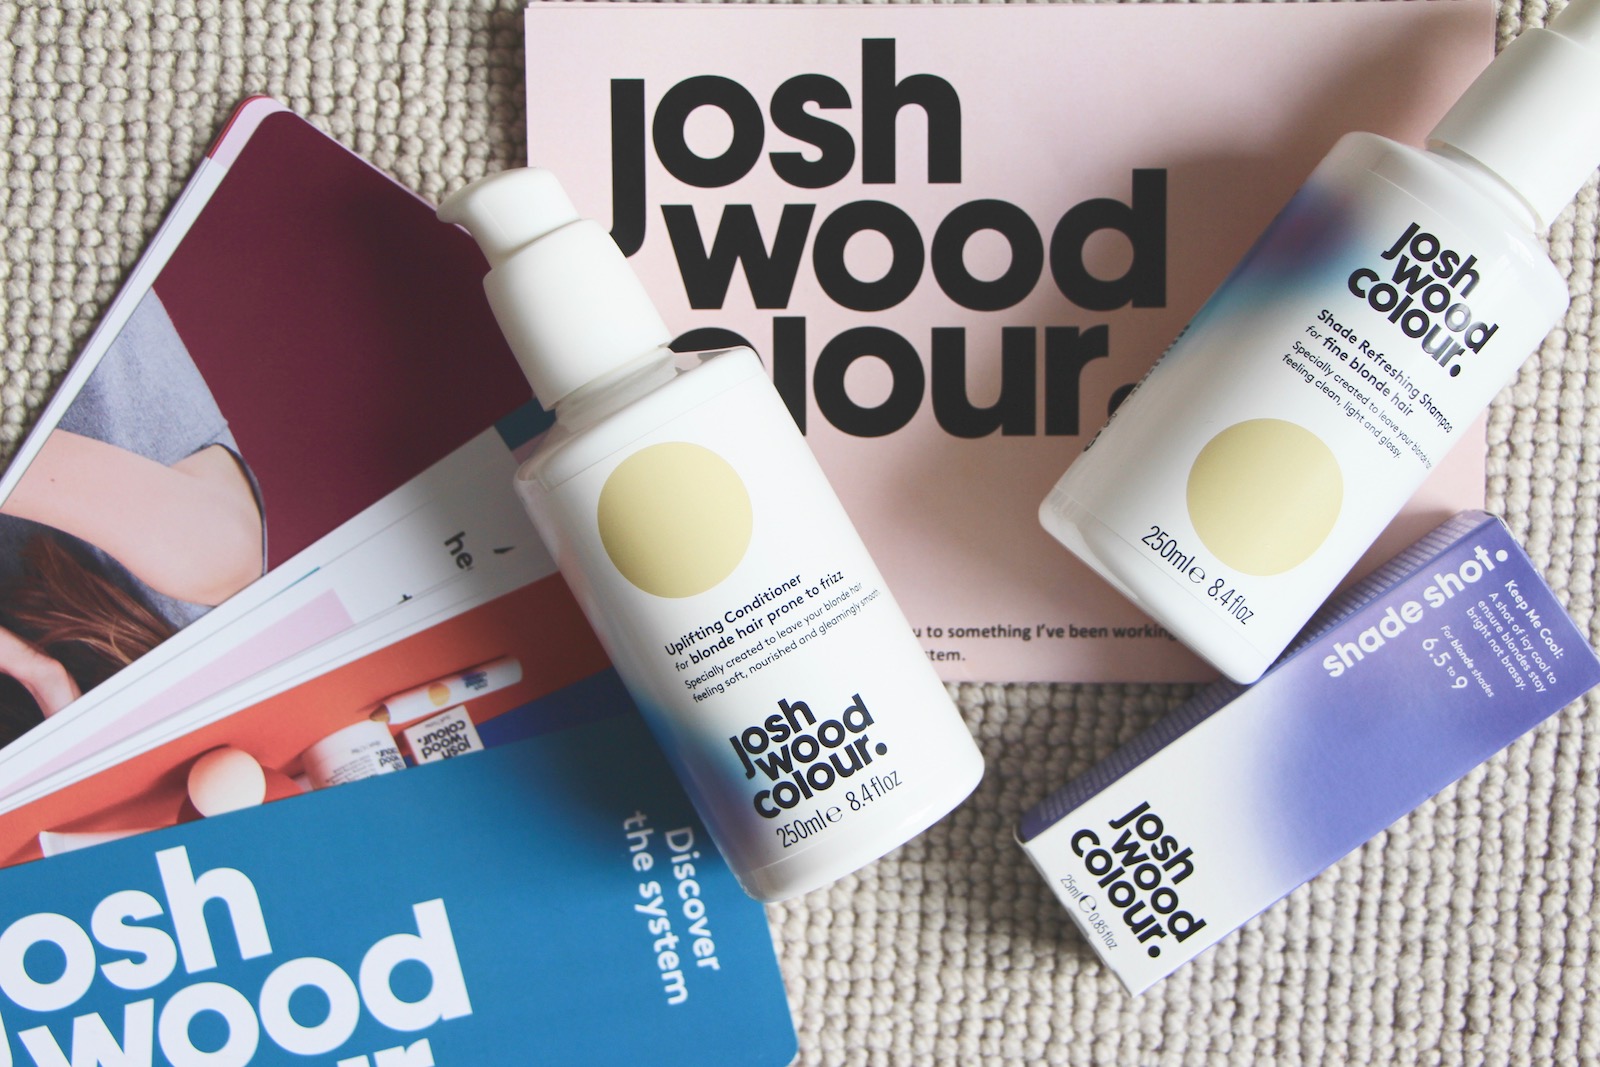 Giveaway: The Josh Wood Hair Makeover